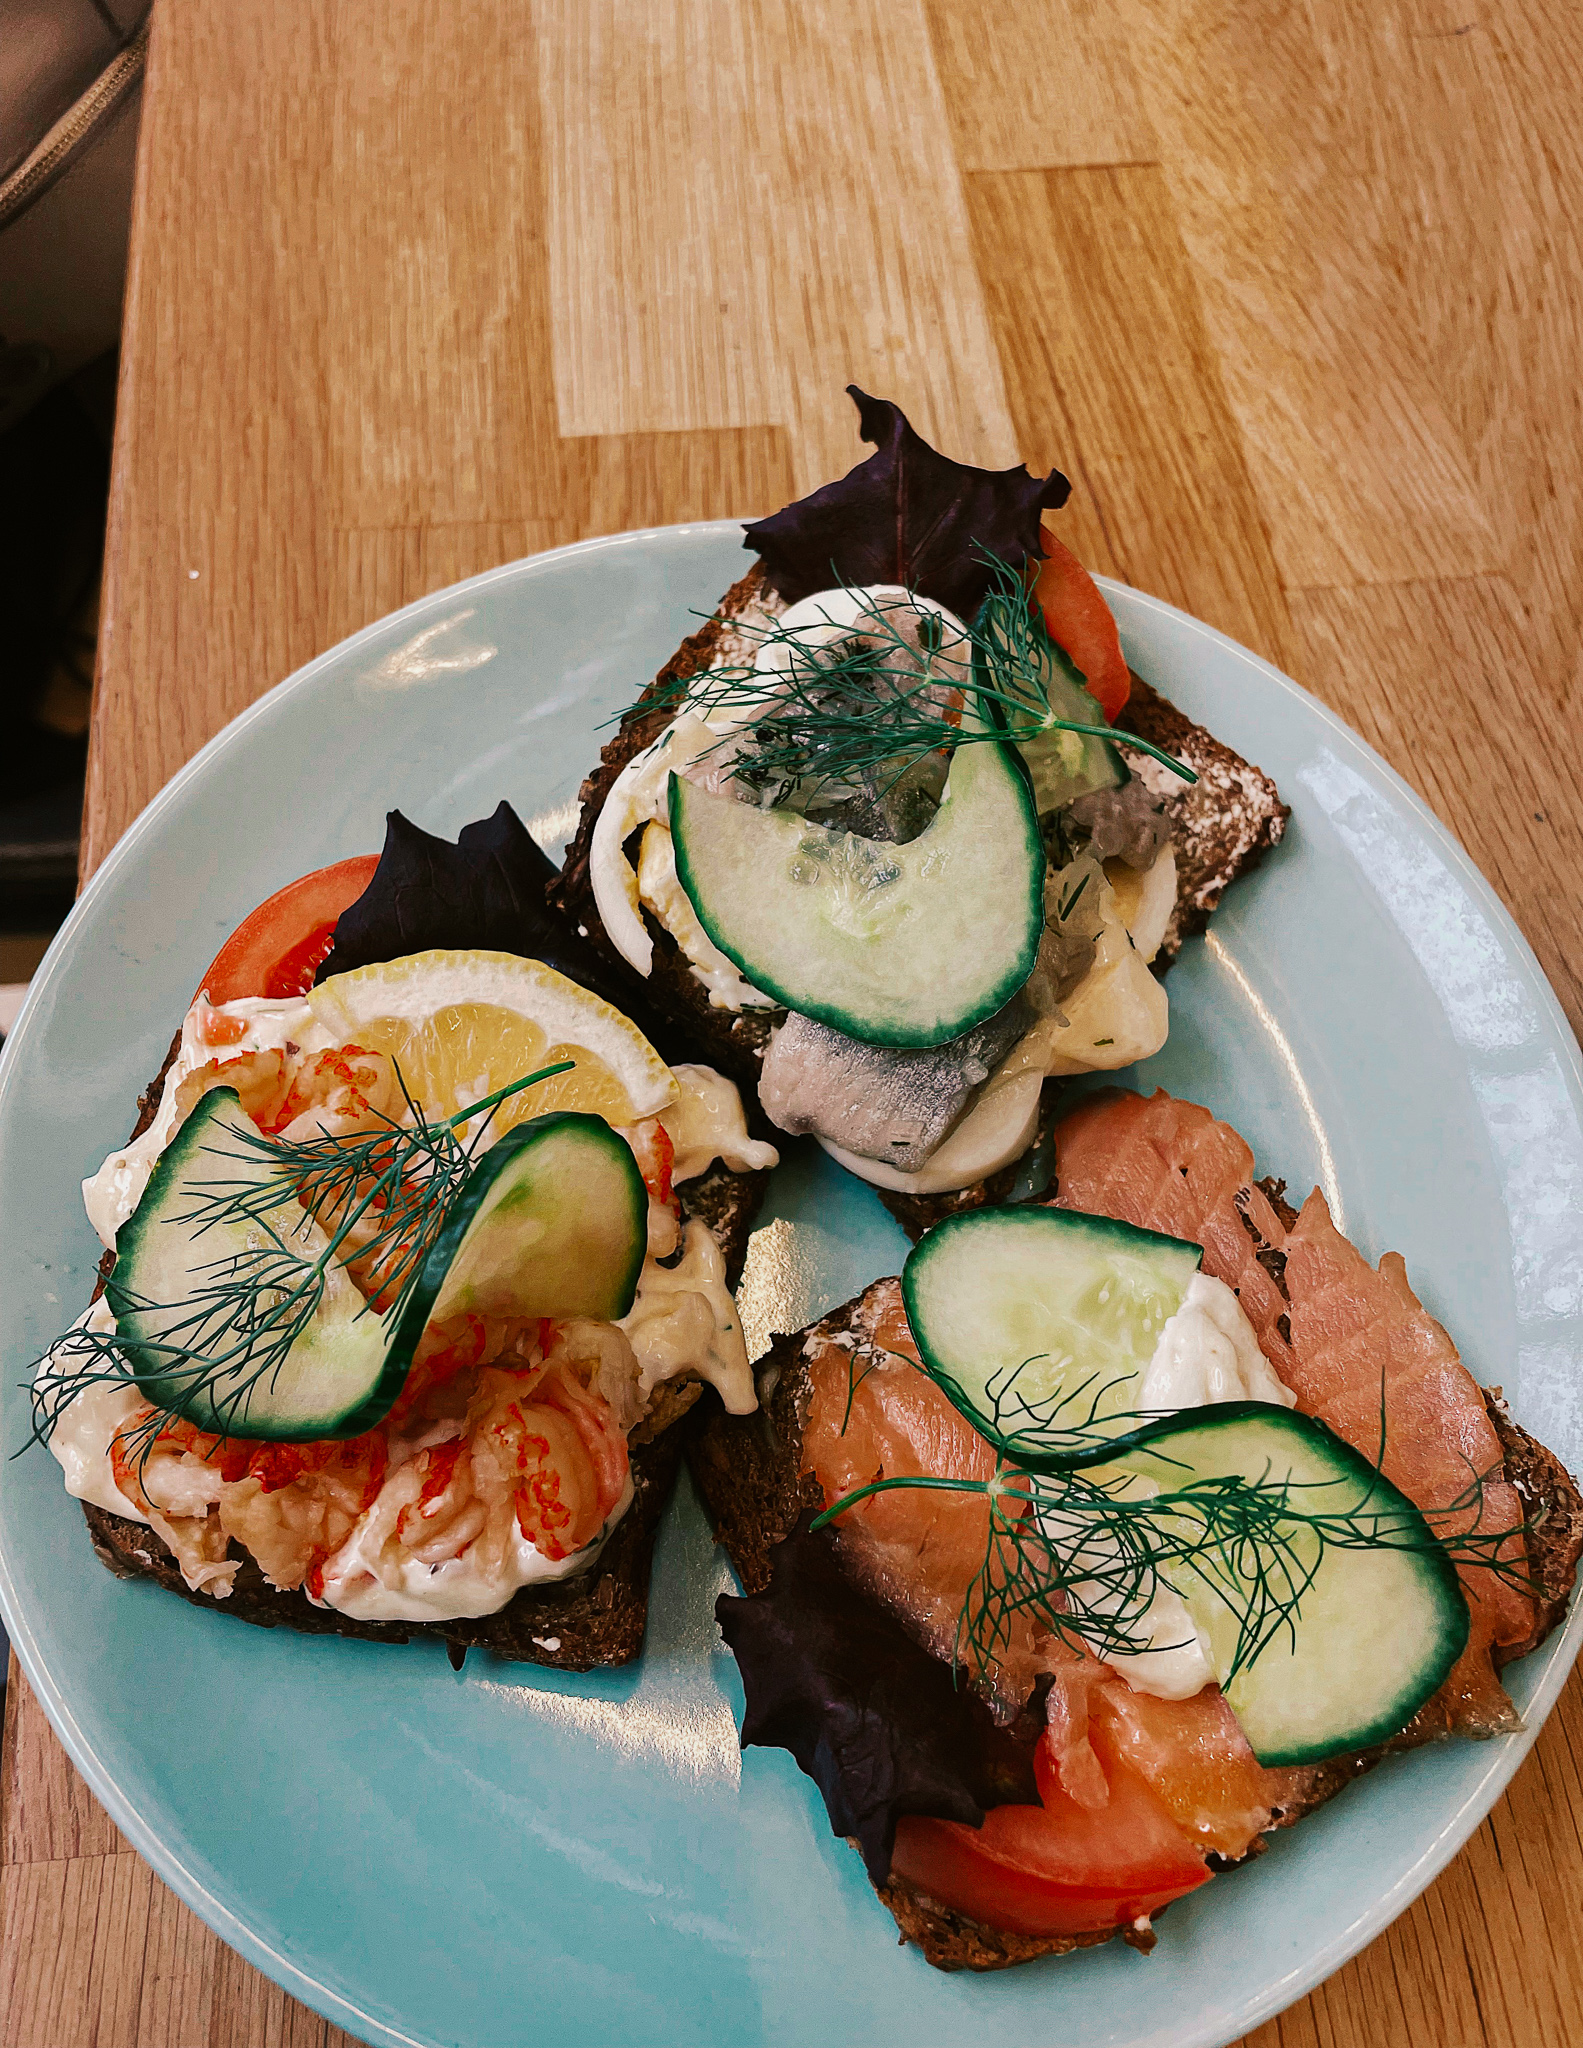 3 Smørrebrød in Copenhagen, open faced sandwiches on Danish rye bread, with lobster, salmon and herring on top with herbs and mayonnaise. 